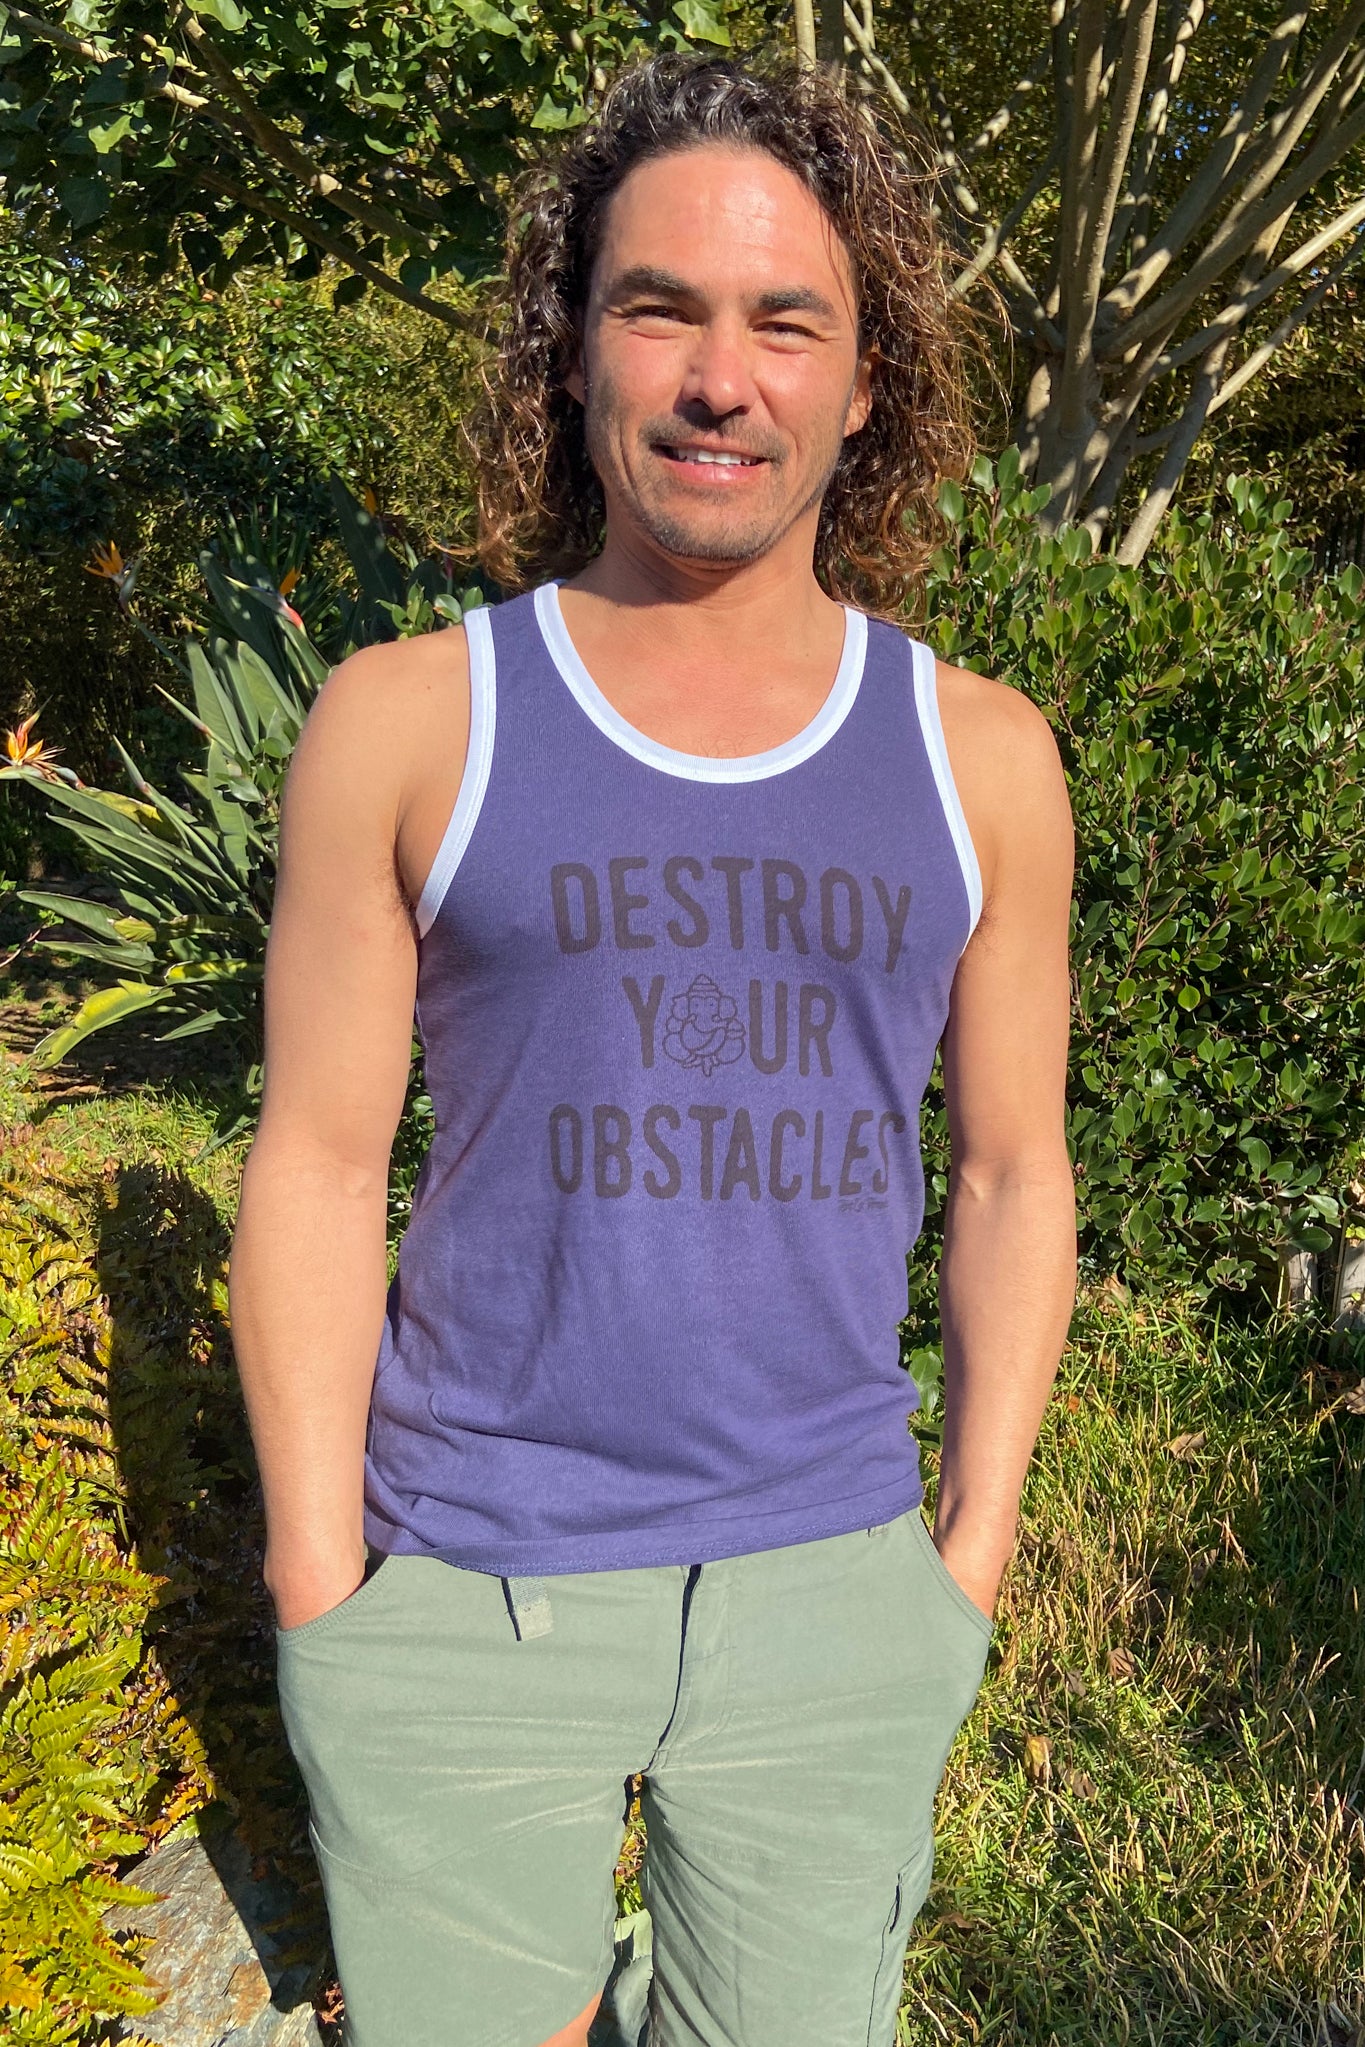 Destroy Your Obstacles Unisex Vintage Vibe Muscle Tee